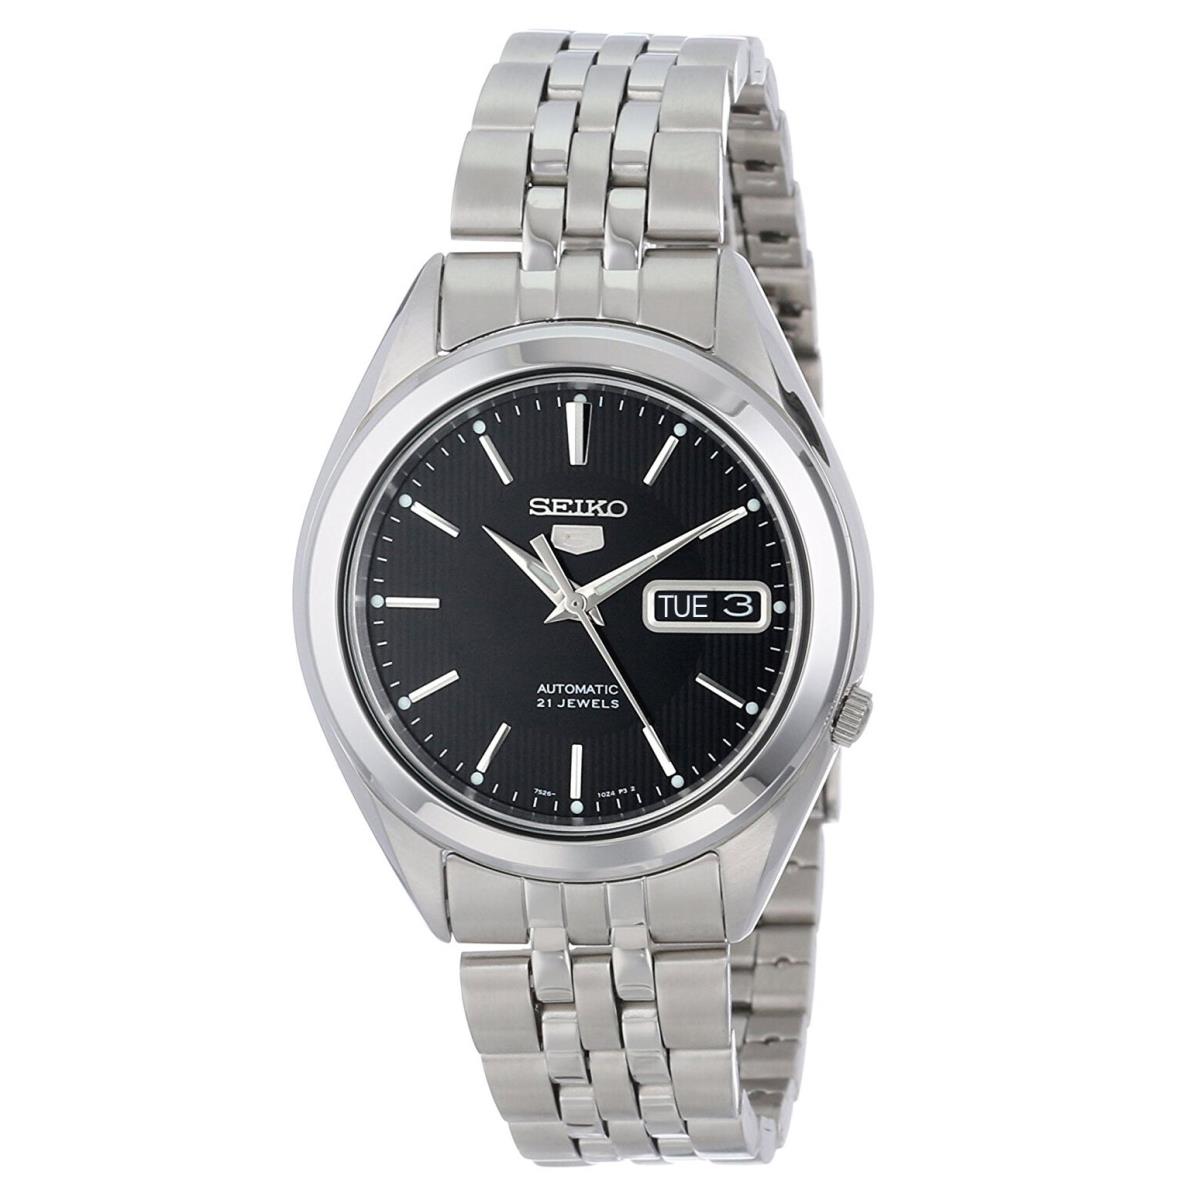 Seiko 5 SNKL23 Automatic Day-date Black Dial Stainless Steel Mens Watch SNKL23K1